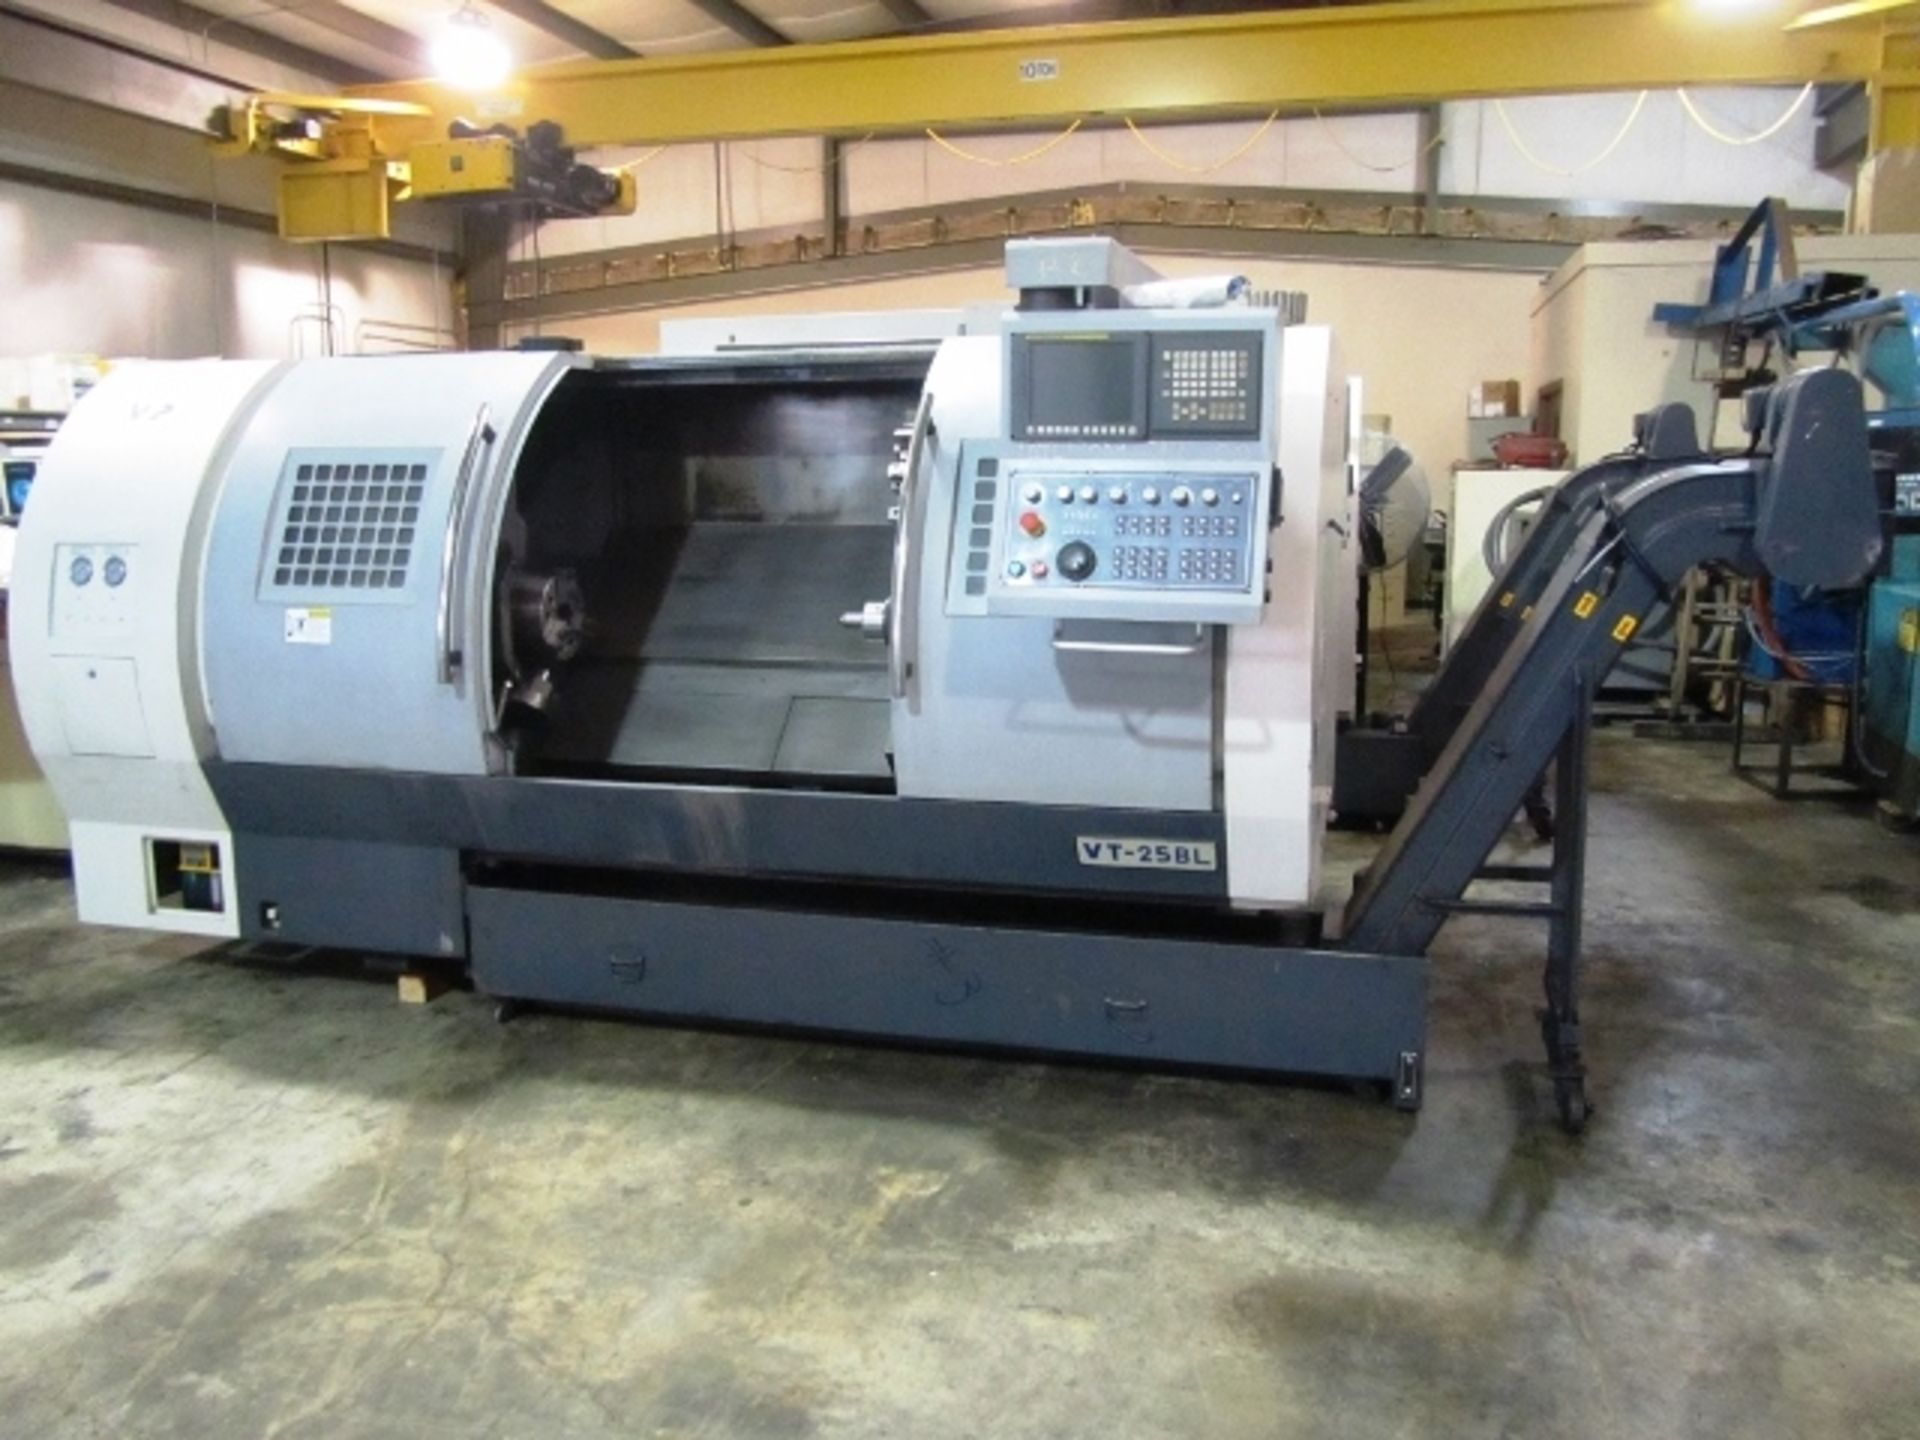 Mighty Viper Model VT25-BL CNC Turning Center with 10" 3-Jaw Power Chuck, 41" Maximum Turning Length - Image 6 of 10